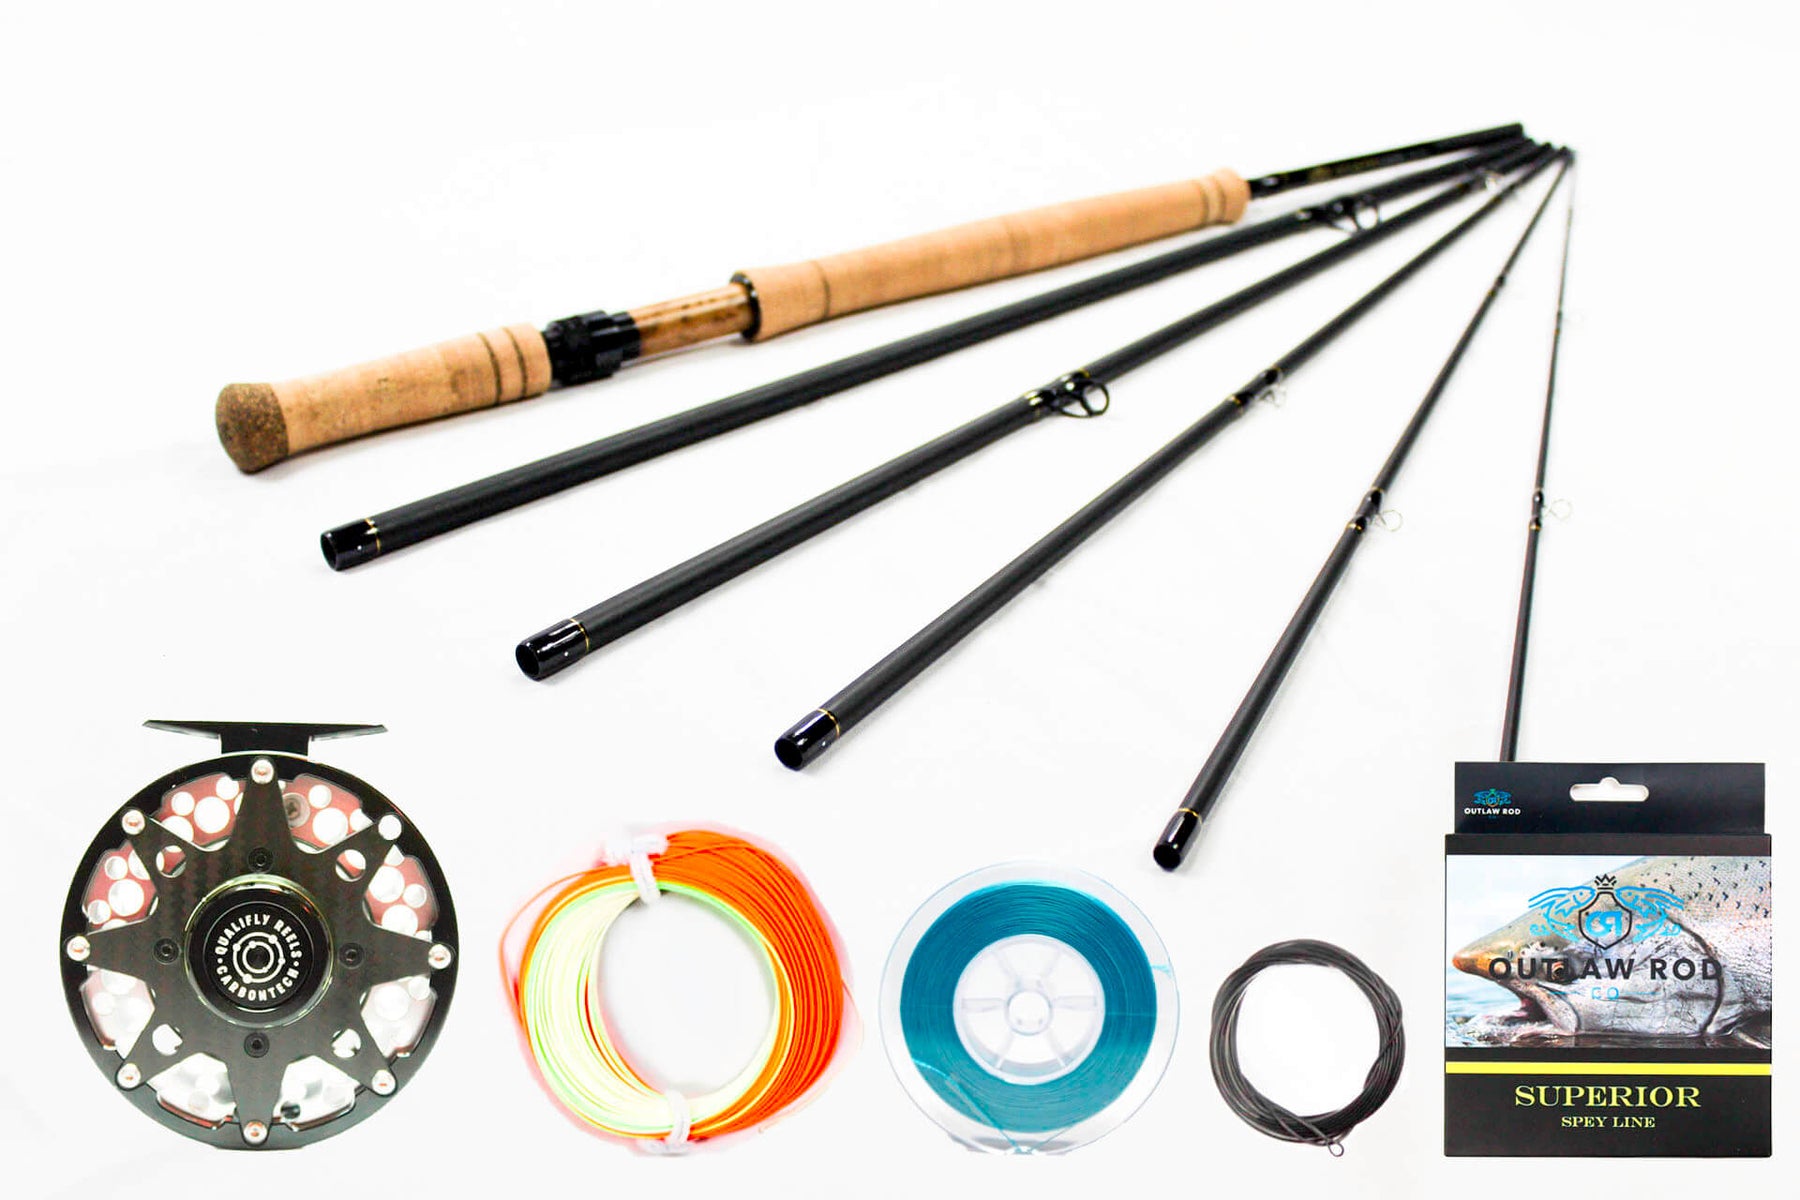 8wt 13ft 6in M-Series (Spey Rod) and Oversized 11-12wt Qualifly Carbon –  Outlaw Rod Co.